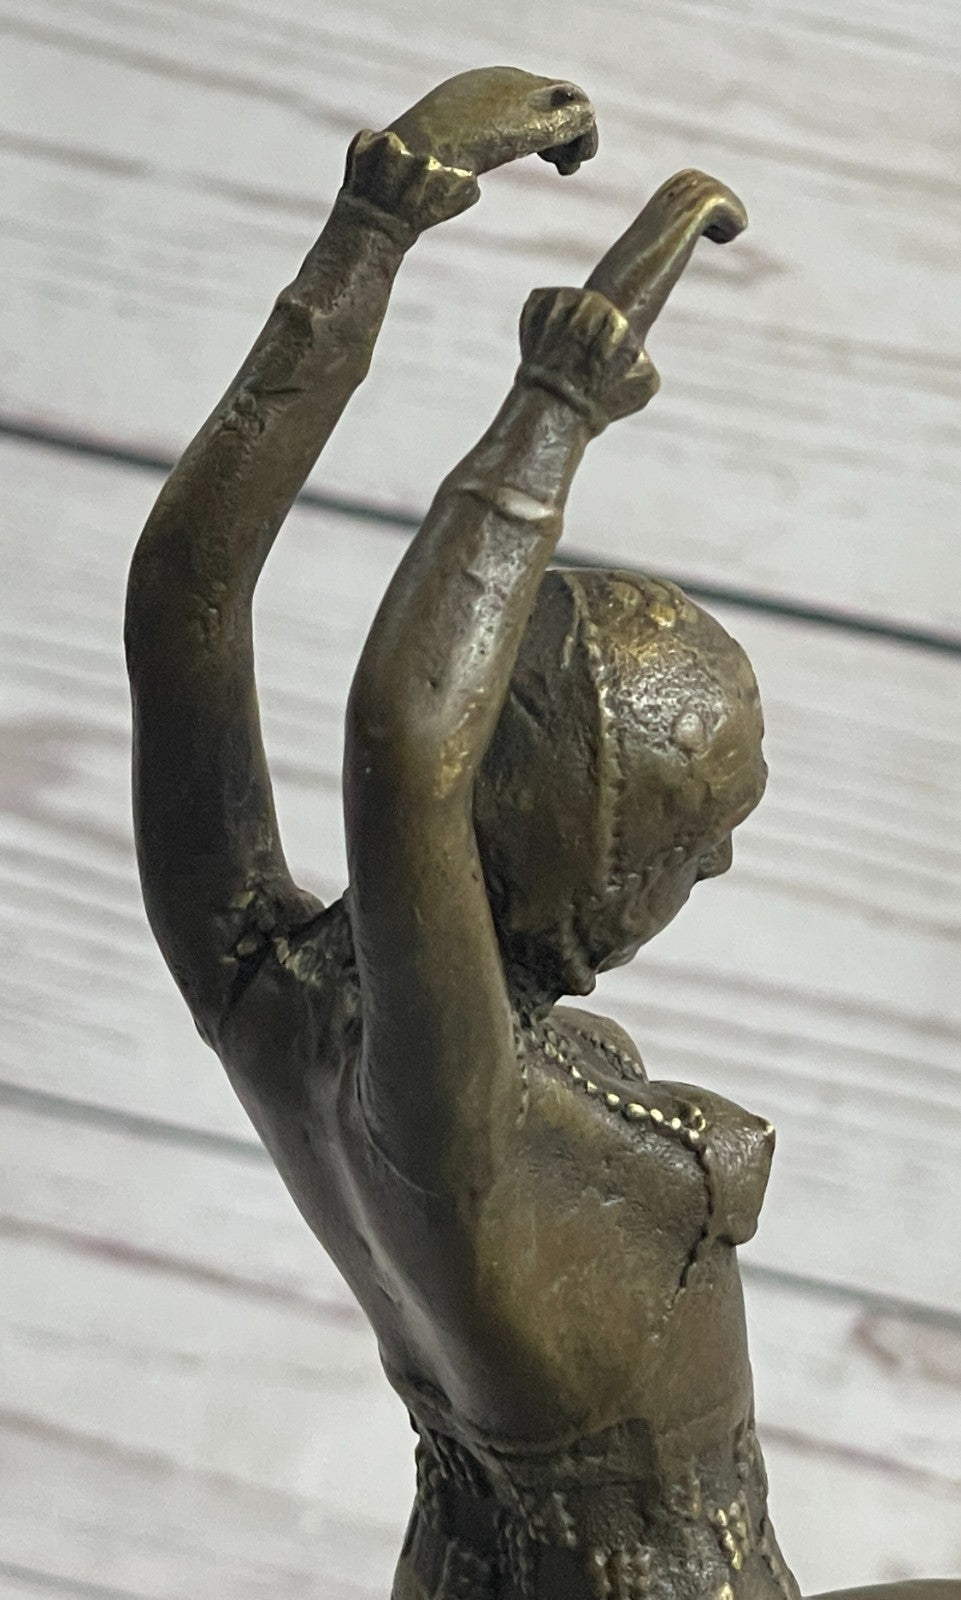 Handcrafted bronze sculpture SALE Chiparus Signed Dancer Tall 10" Deco Art